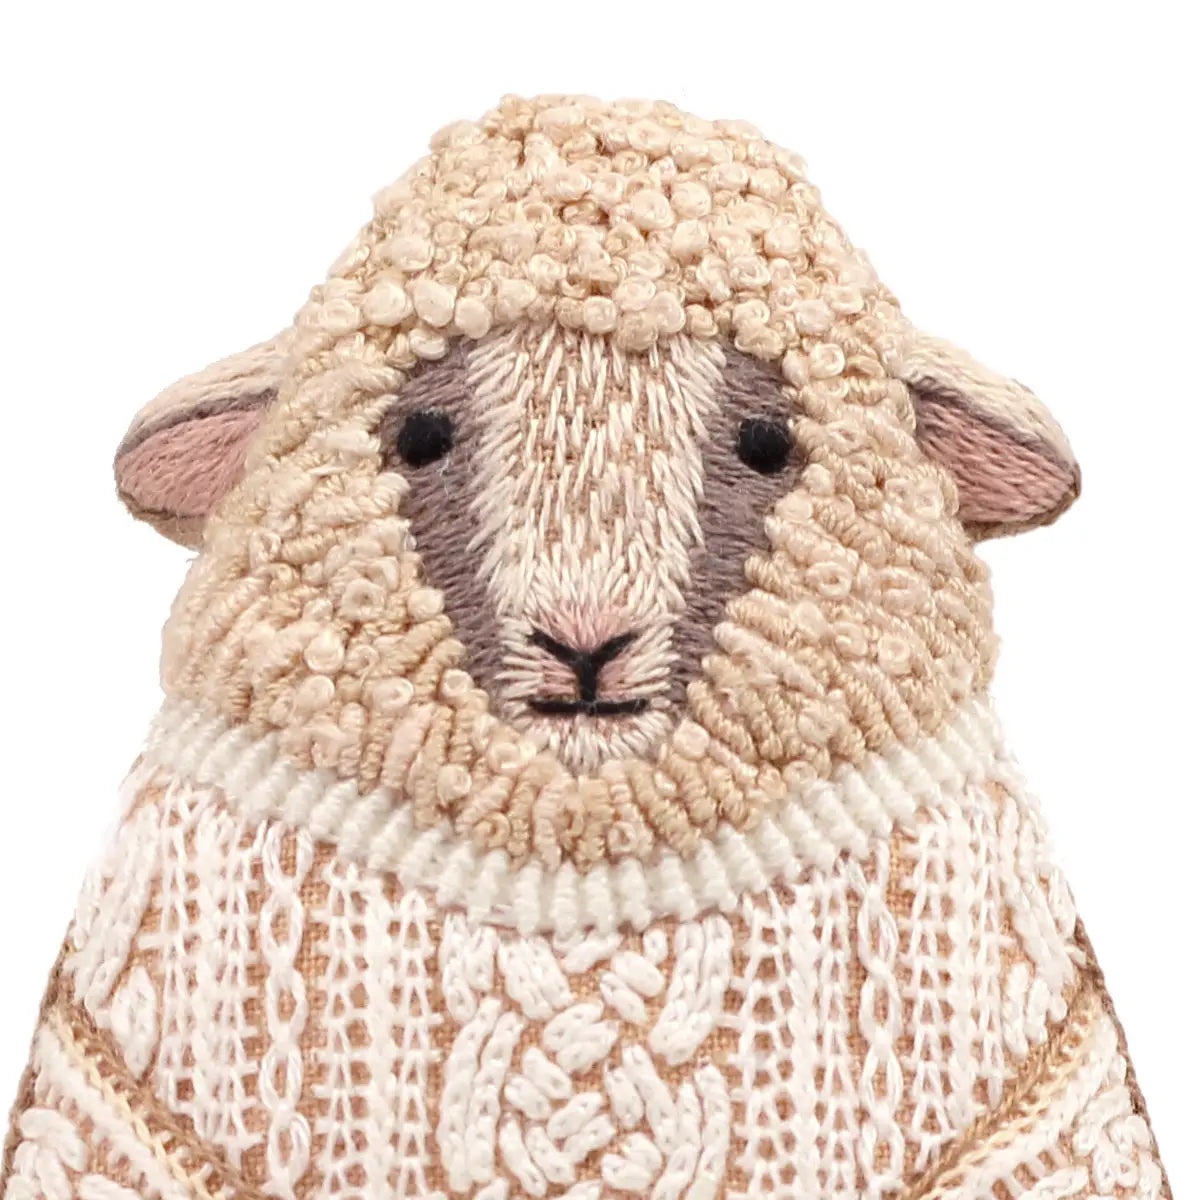 Sheep Embroidery Doll Kit